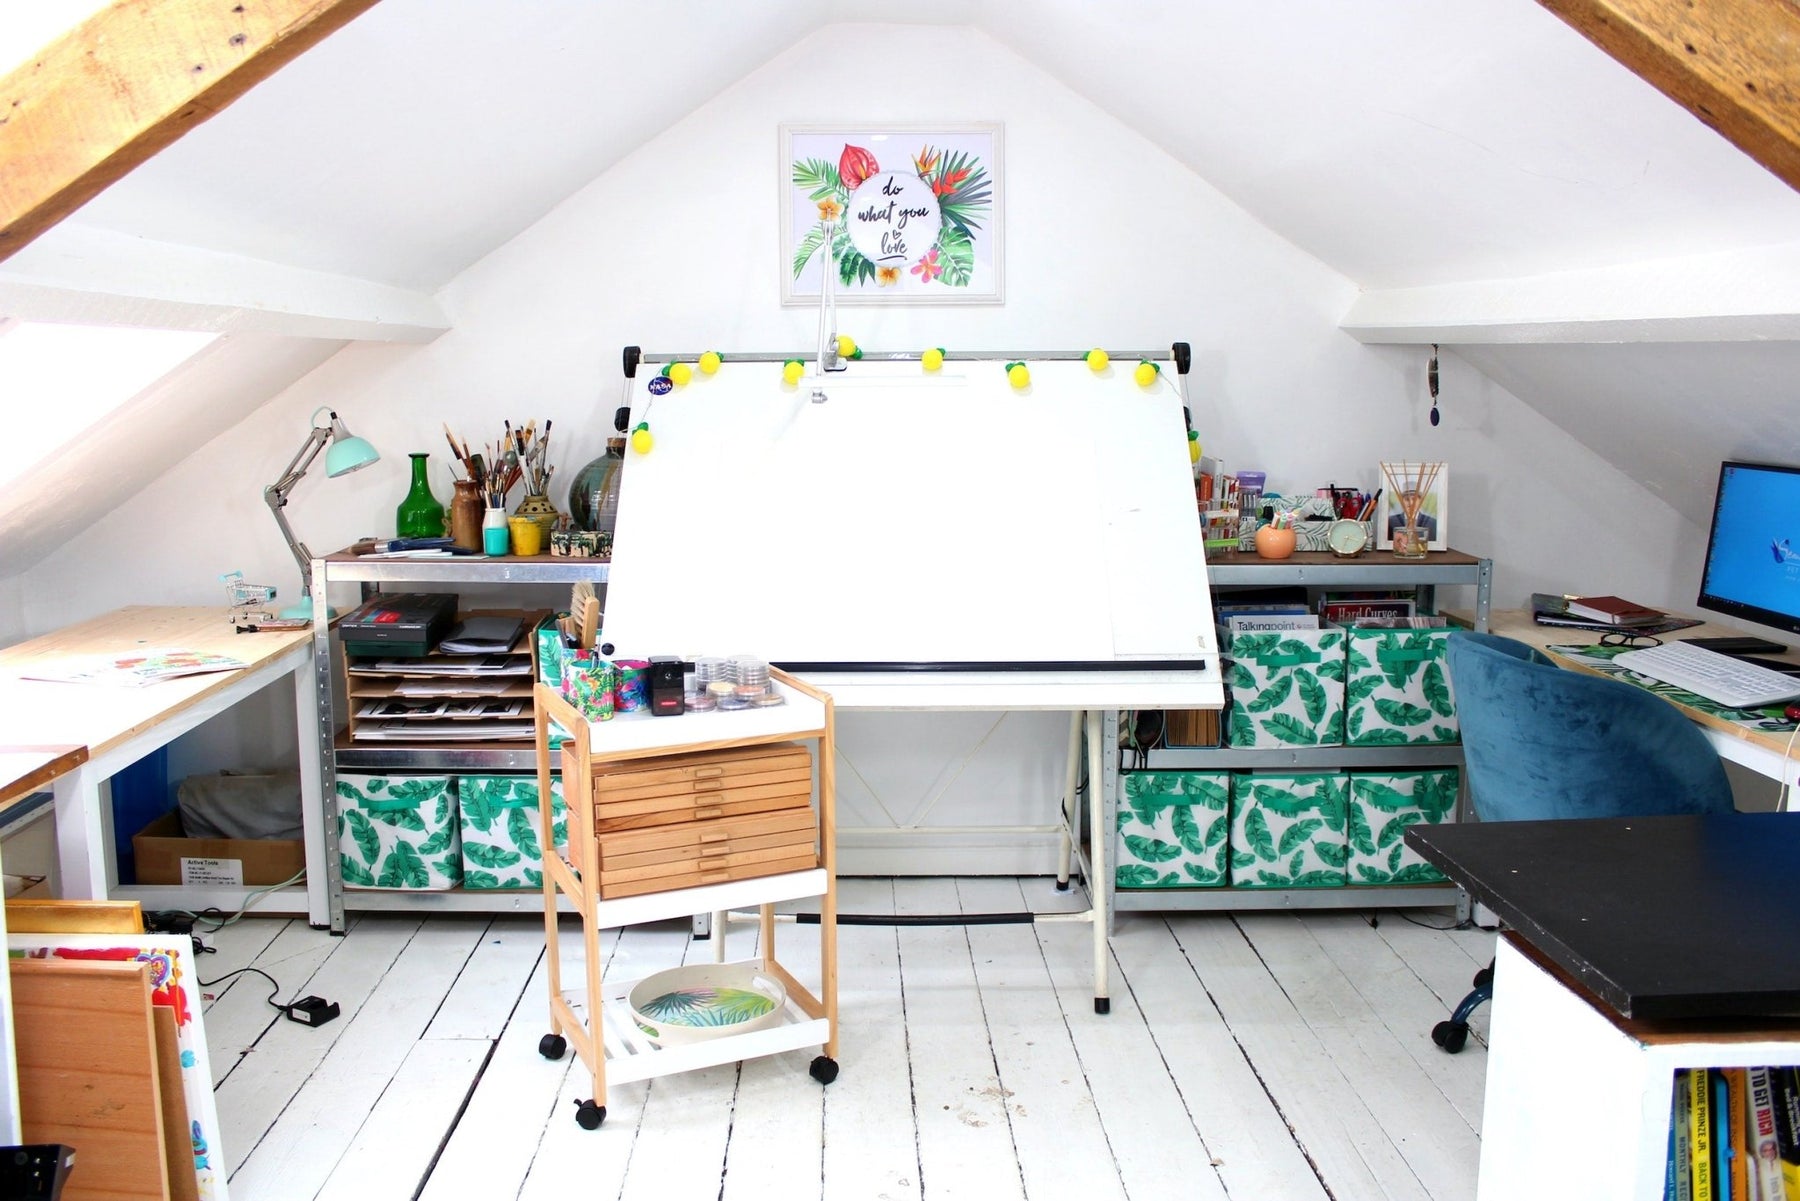 How To Set Up Your Own Art Studio (Even When There’s No Space) - Antsy Labs